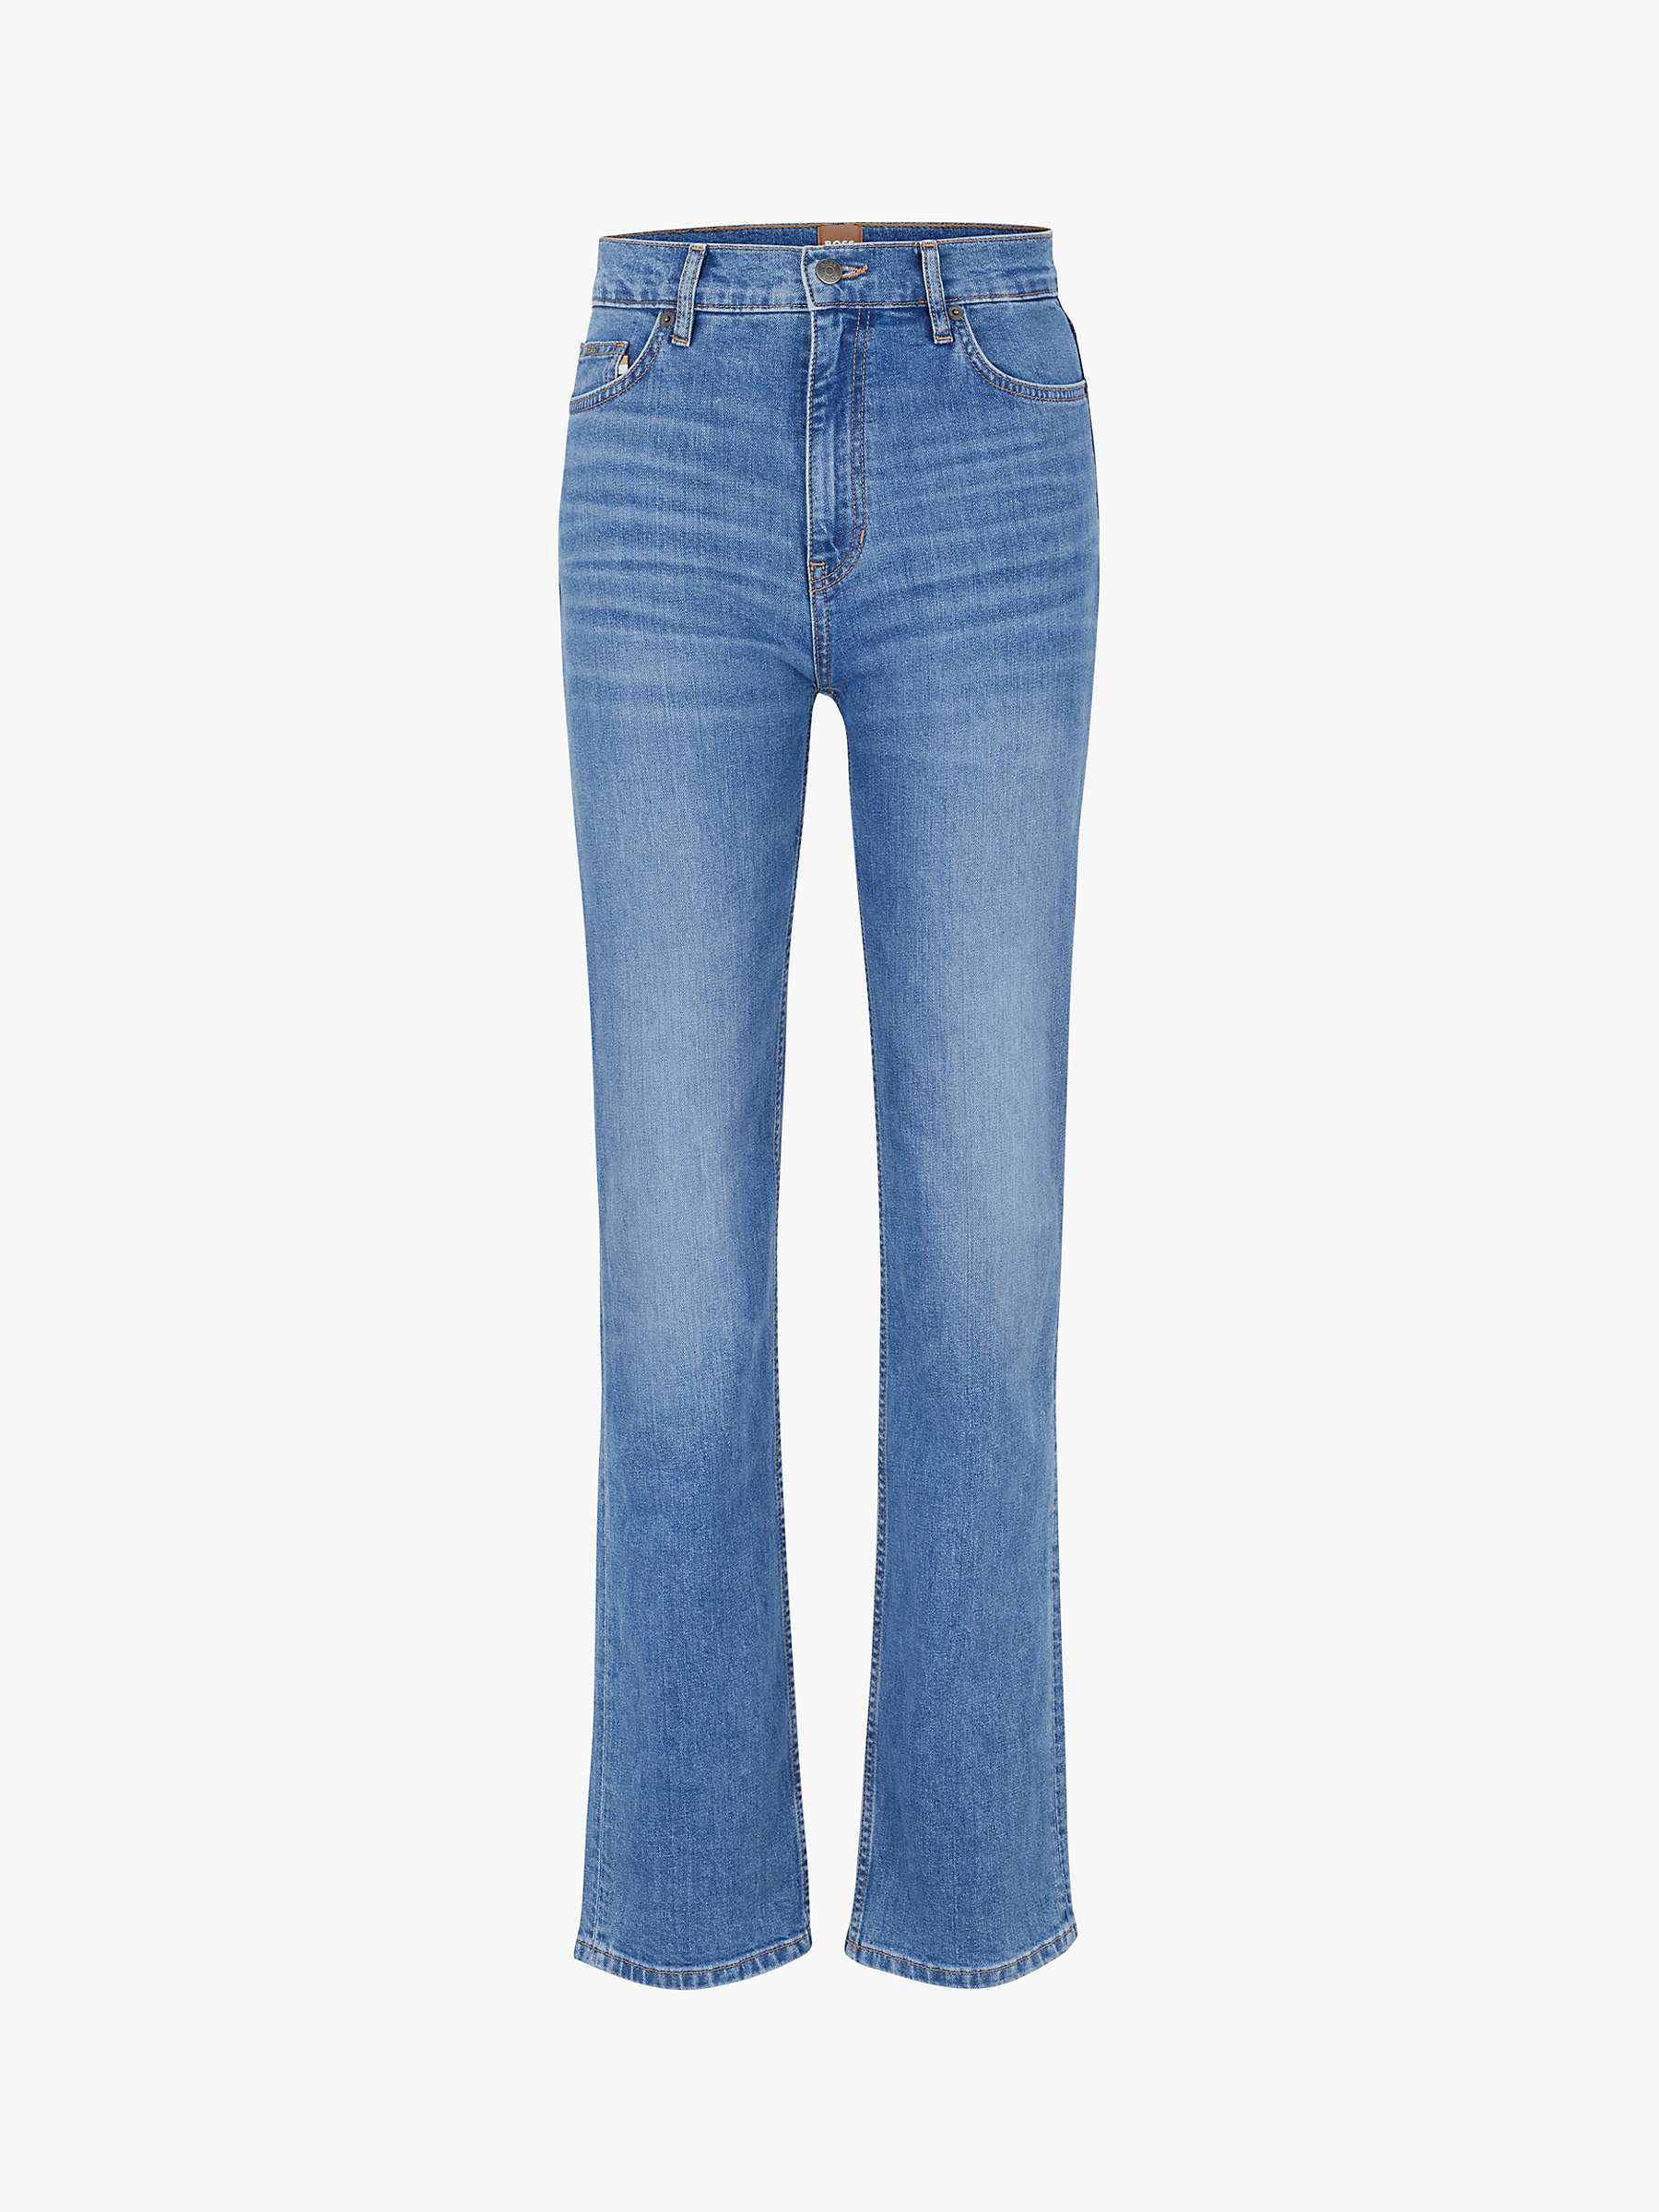 Buy BOSS Ada Straight Fit Jeans, Bright Blue Online at johnlewis.com